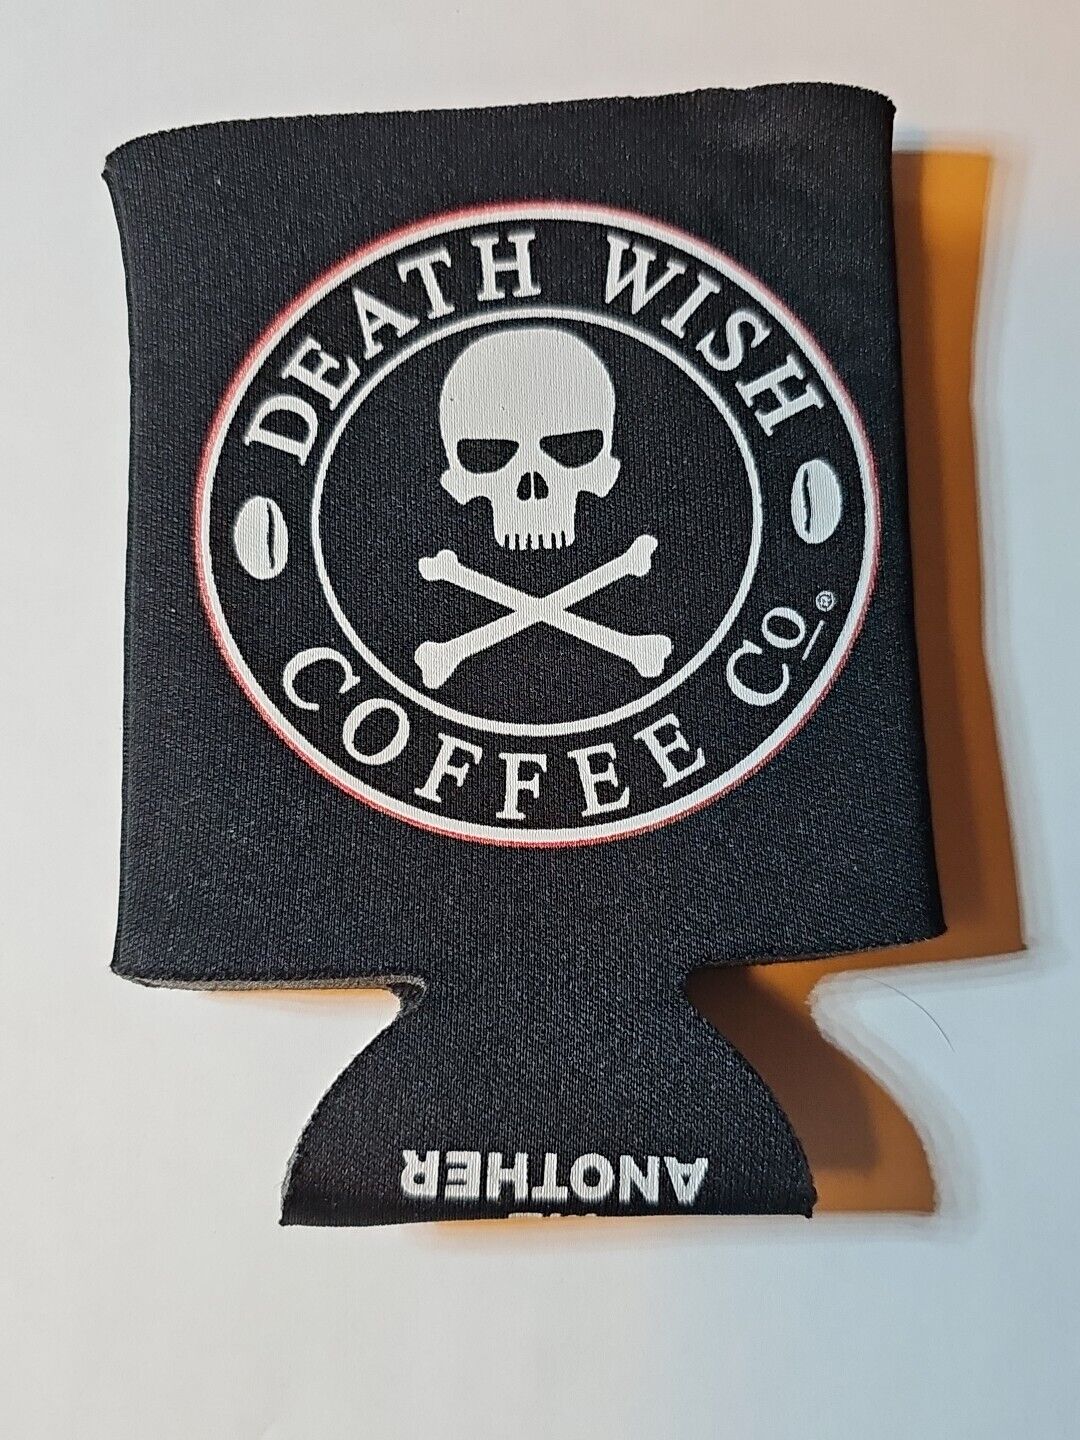 Death Wish Coffee Co. Can Koozie Pass Me Another One More Coffee & I\'m All Yours